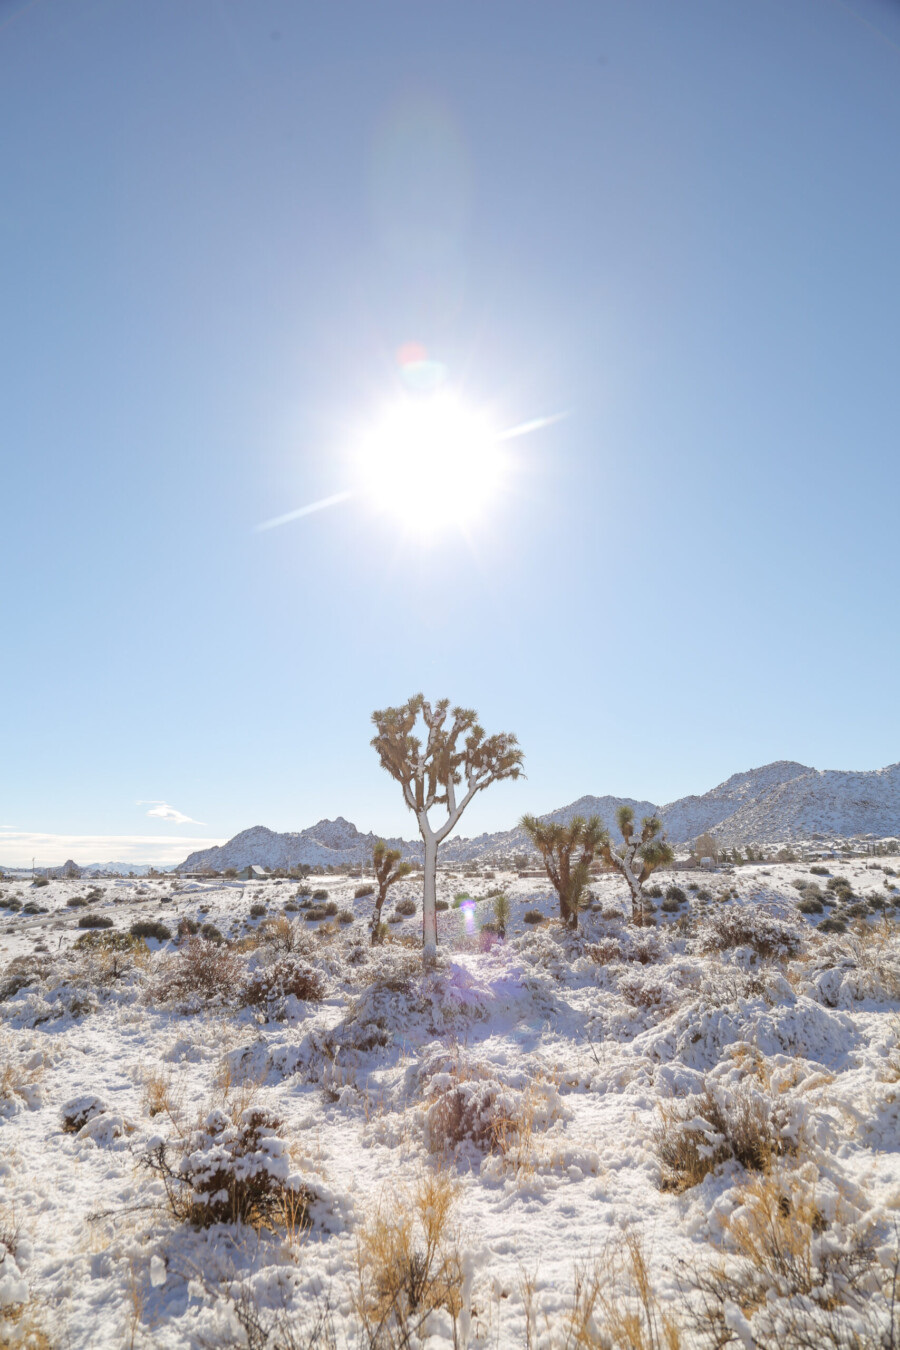 A rare snow day in Pioneertown near Joshua Tree California. Image shows snow on the ground and on a few Joshua Trees with mountains in the background.